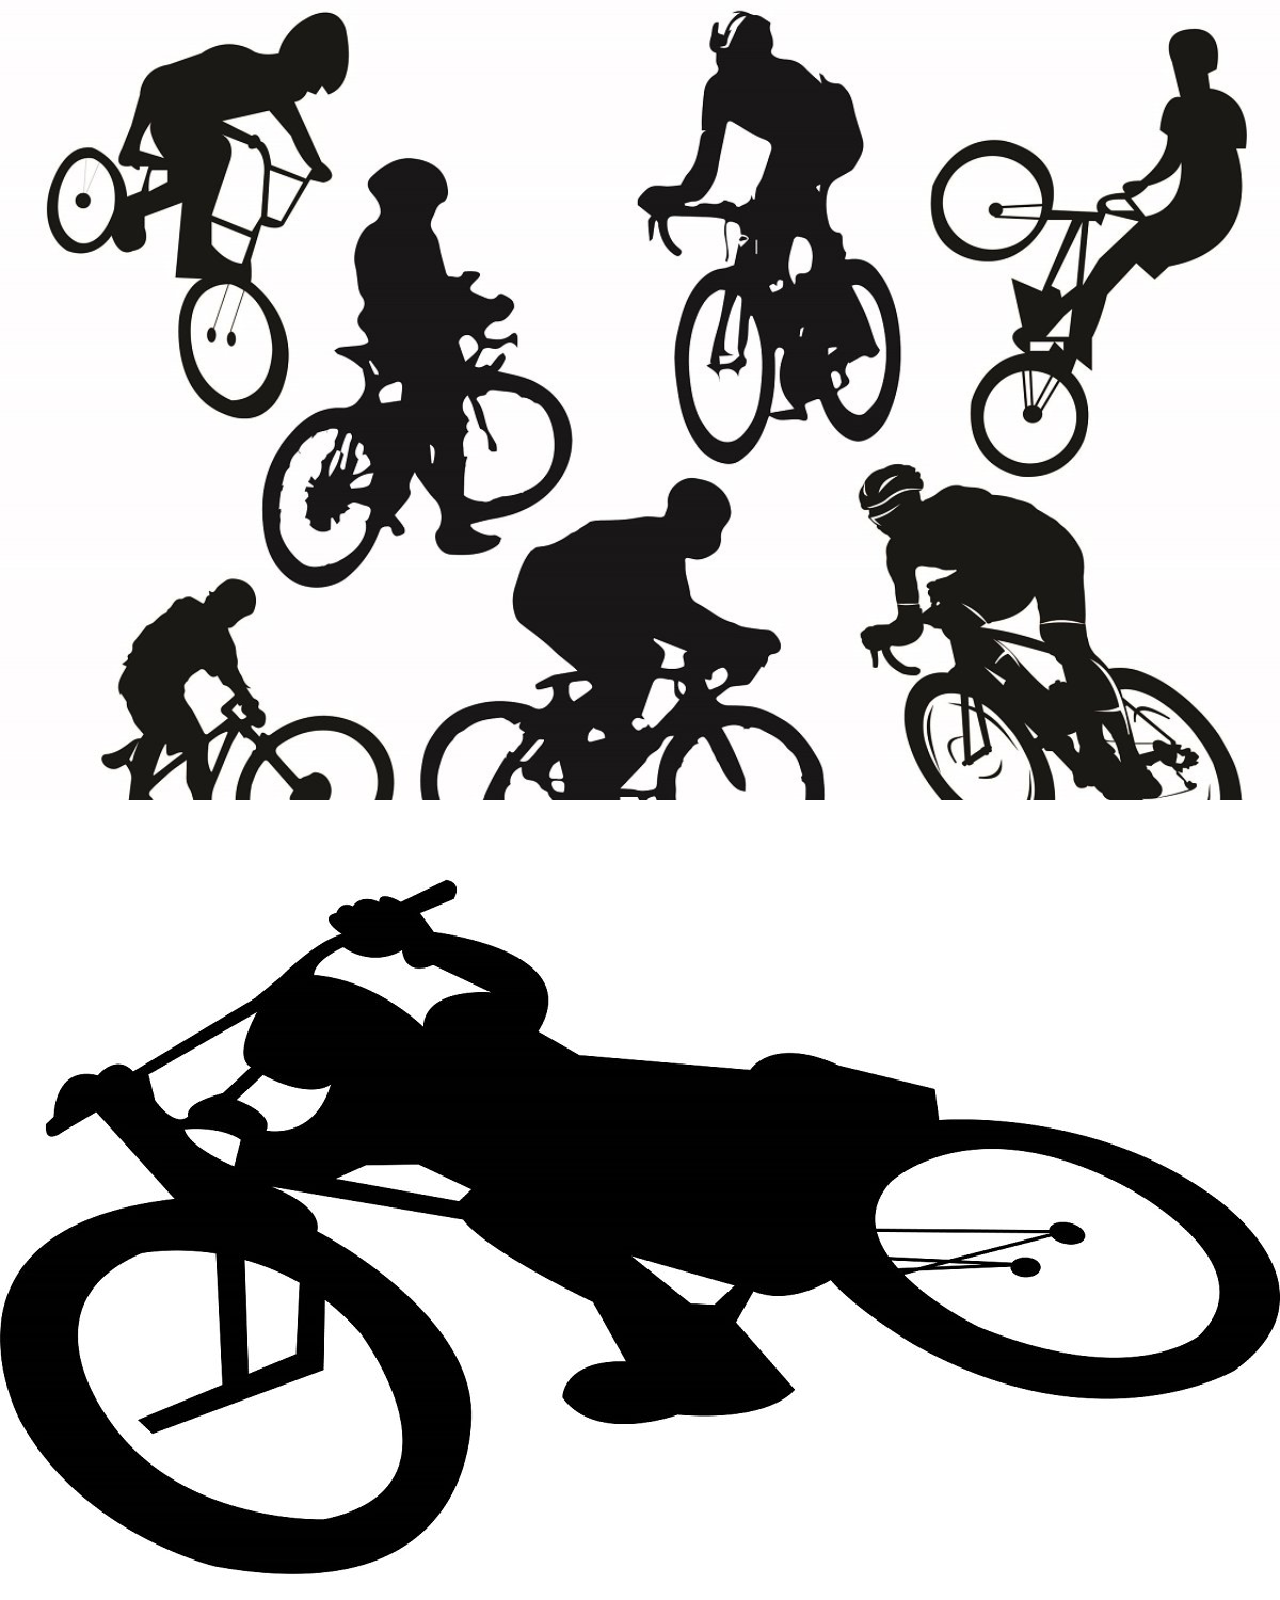 Bmx rider silhouette clipart pinterest image preview.